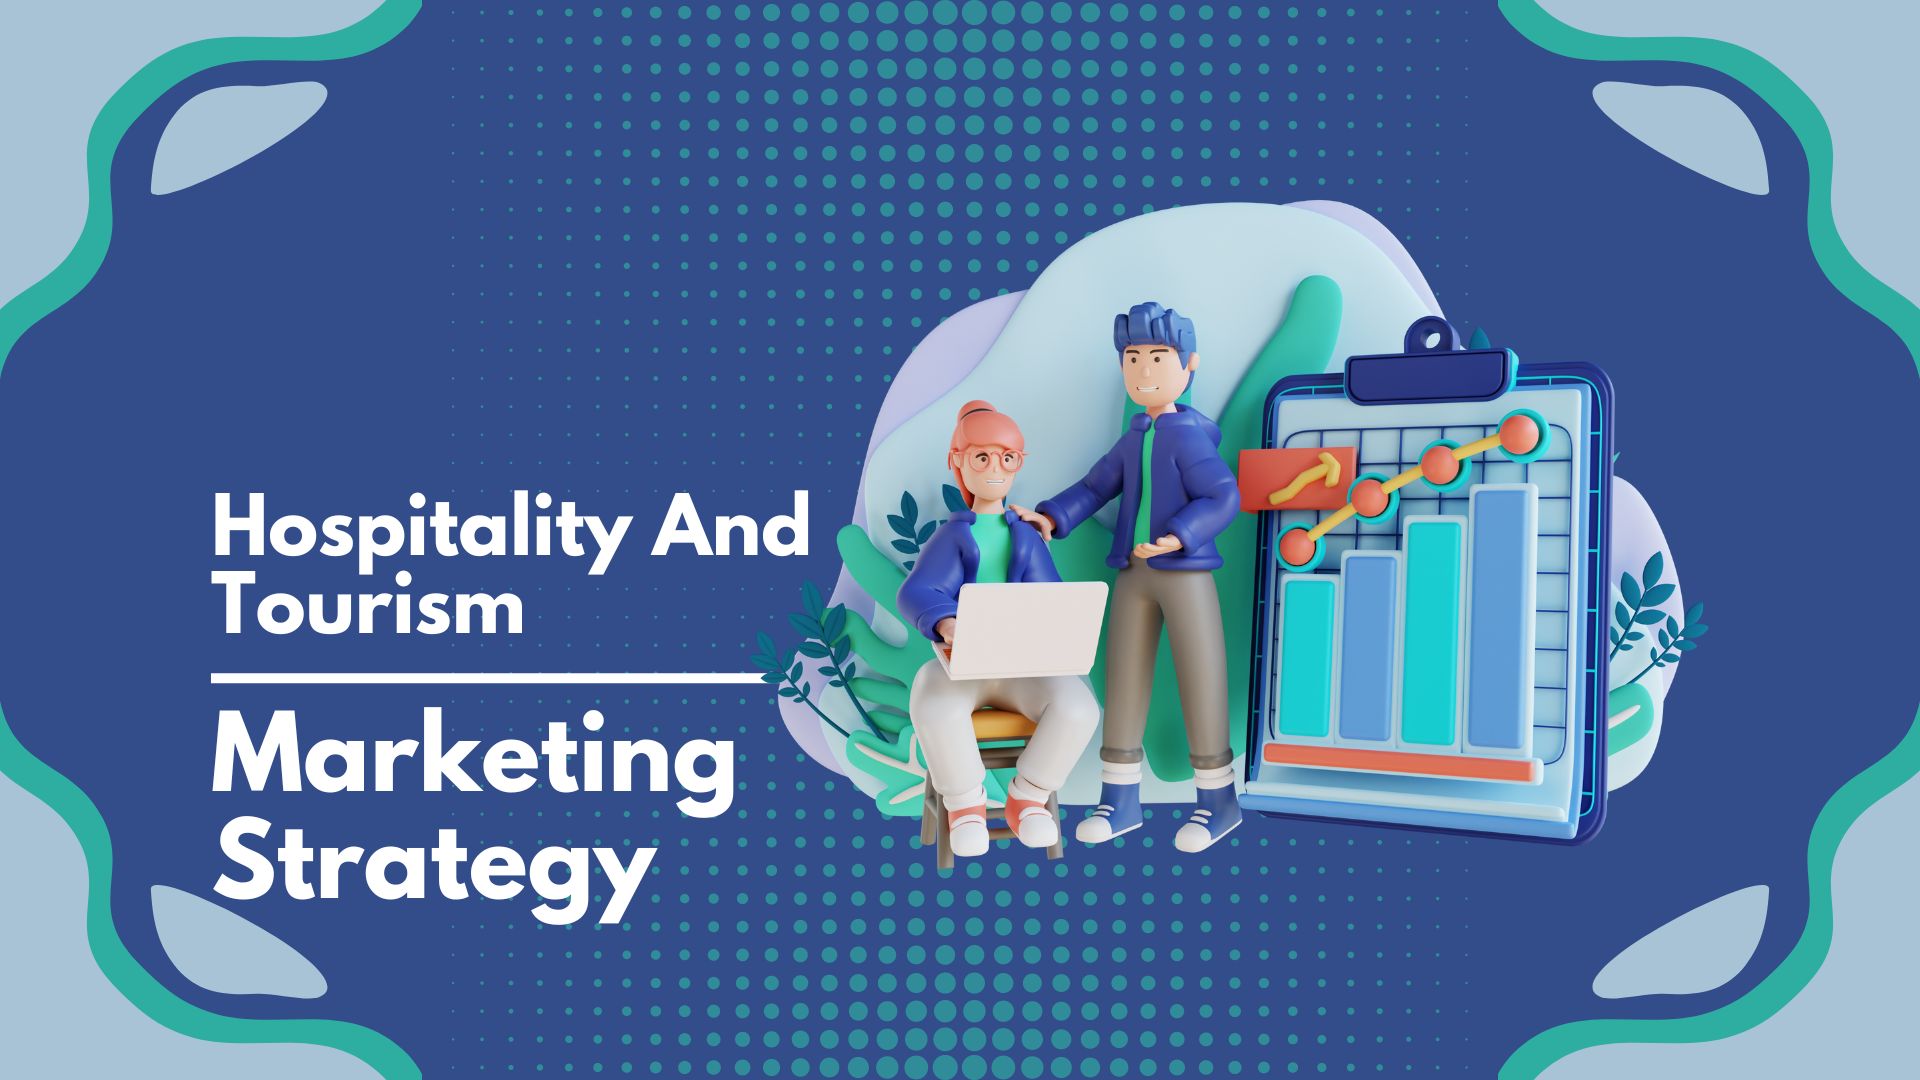 Top Marketing Strategies In The Hospitality And Tourism Industry In 2023